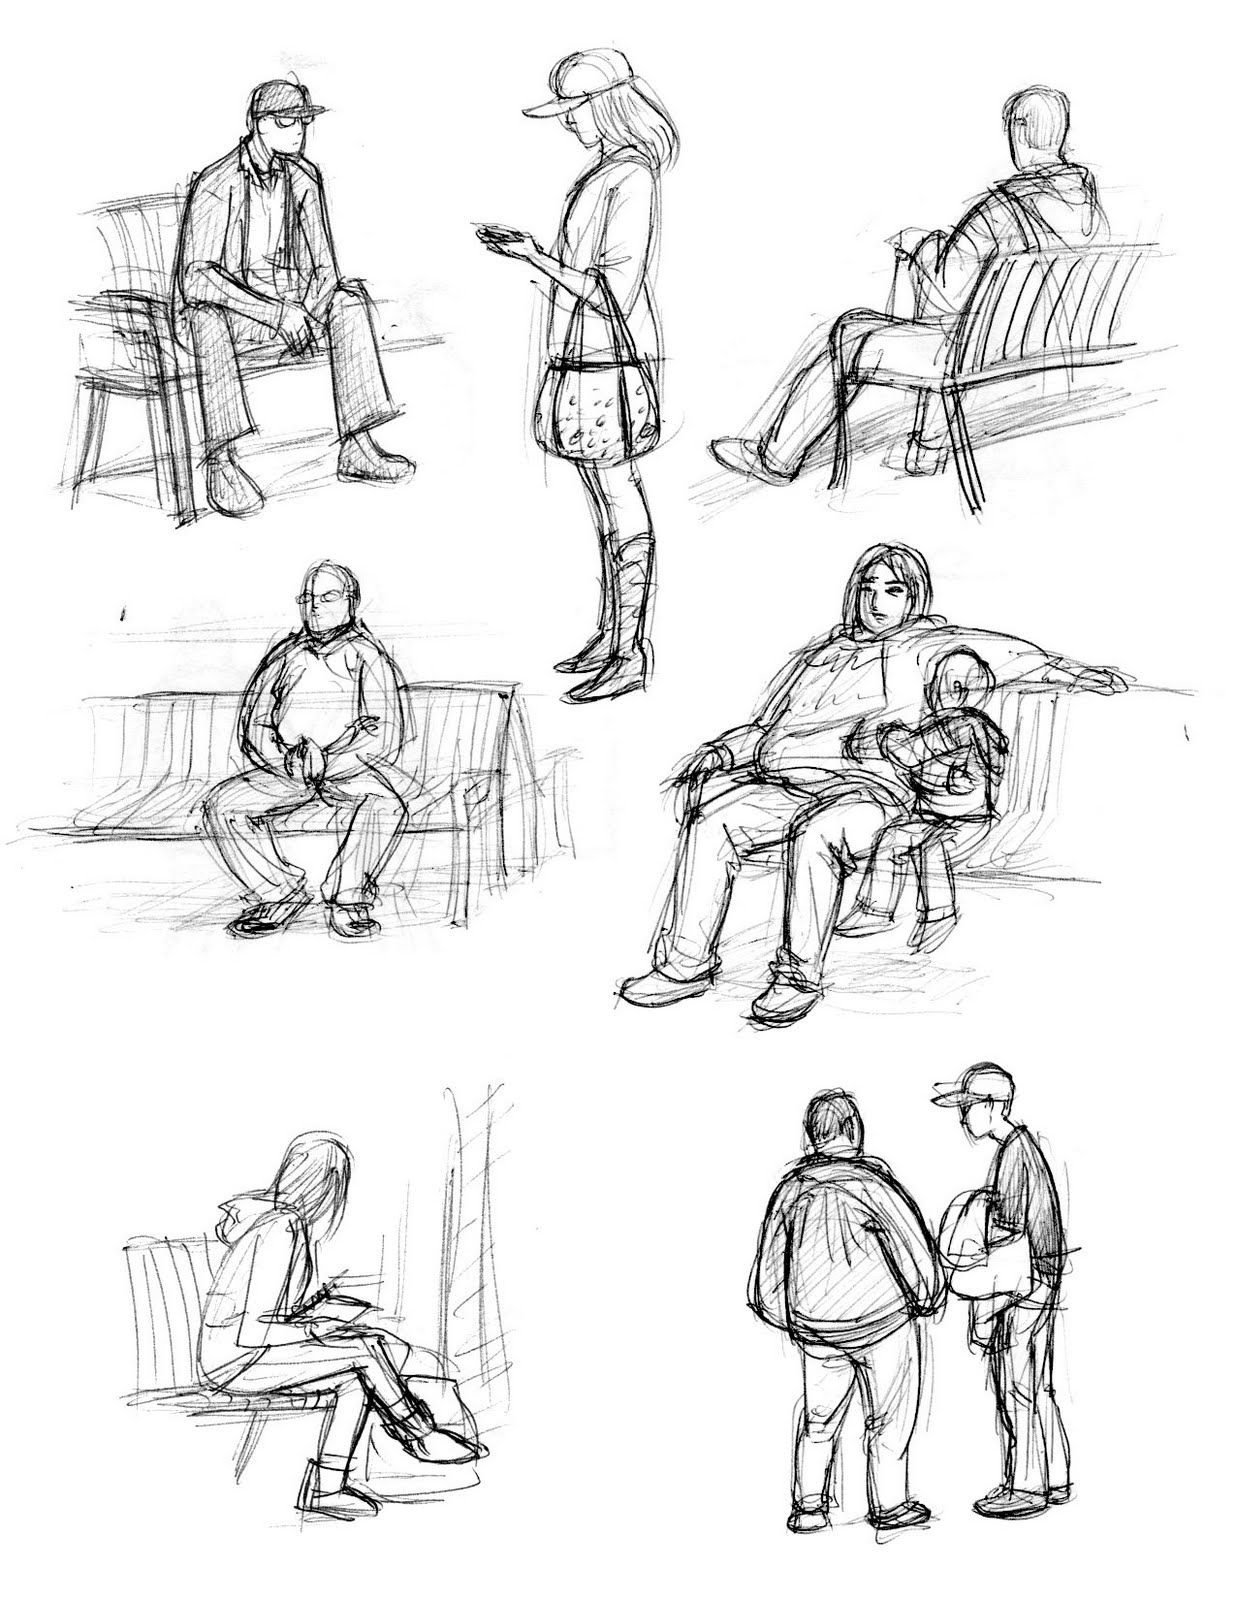 A series of pencil sketches of people and pairs of people. Faces are vague but they have expressive postures. Several are sitting on park benches